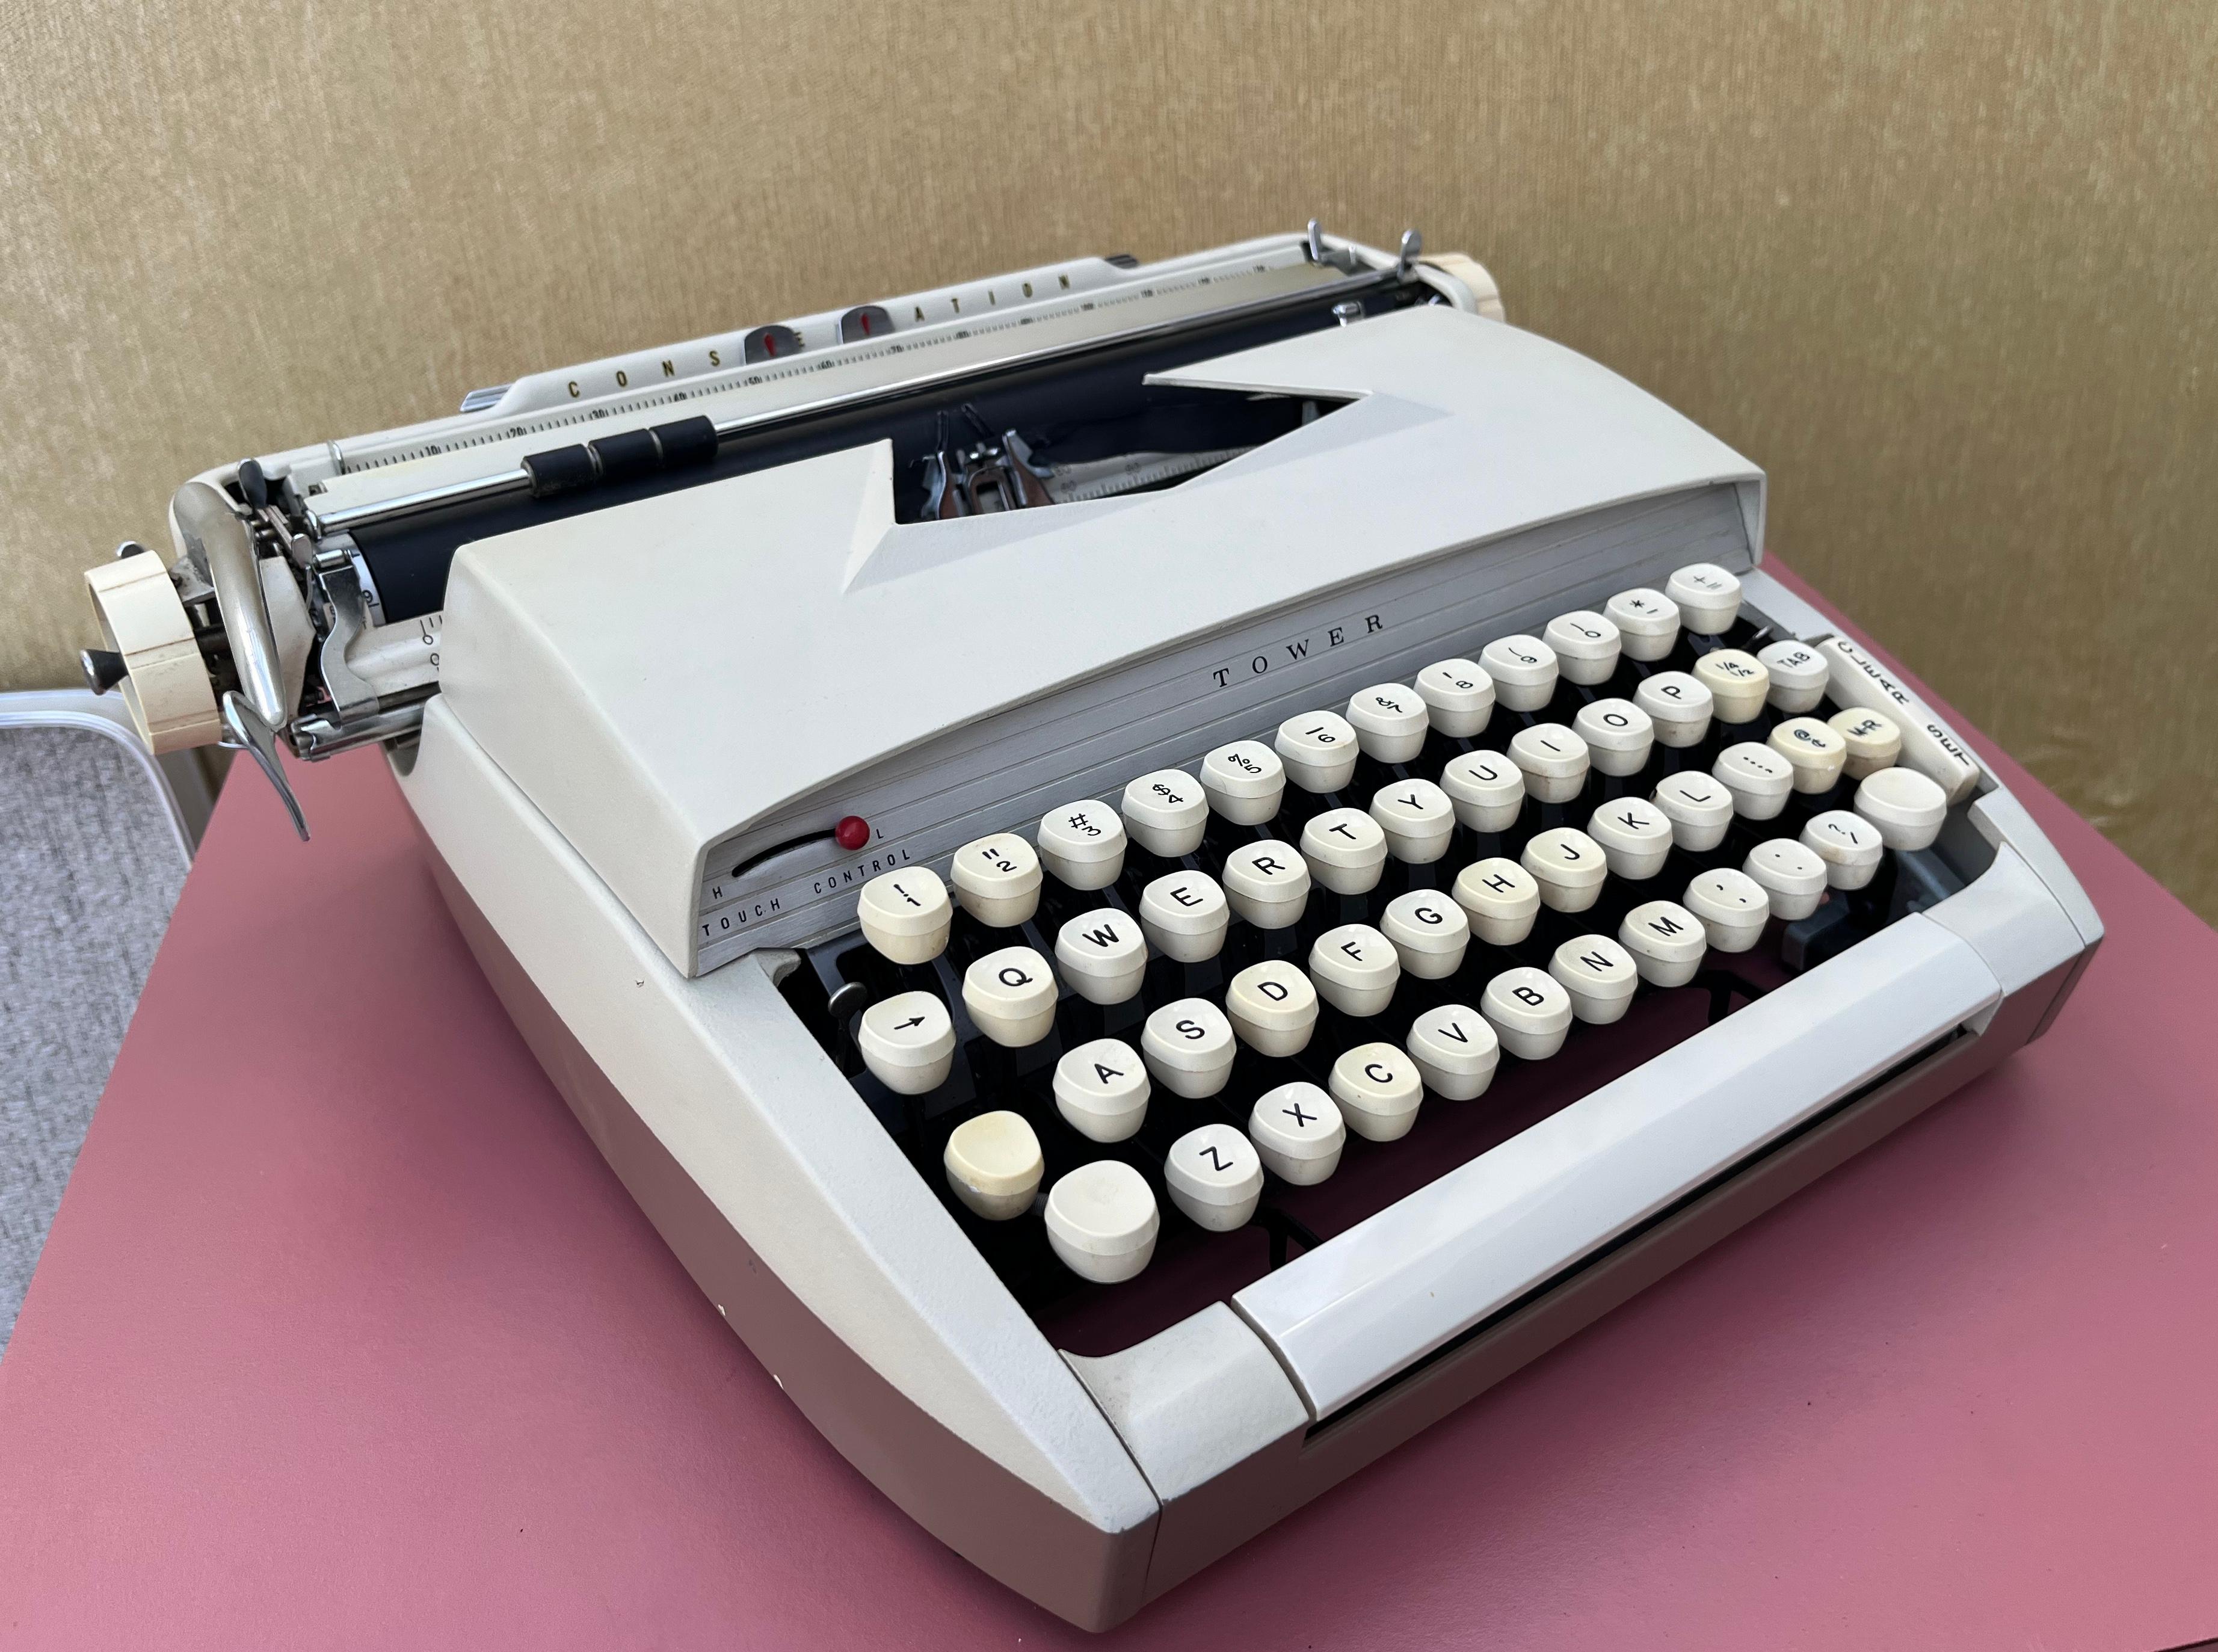 Sears Tower Constellation Portable Typewriter W/Metal Case. Circa 1960s. For Sale 11